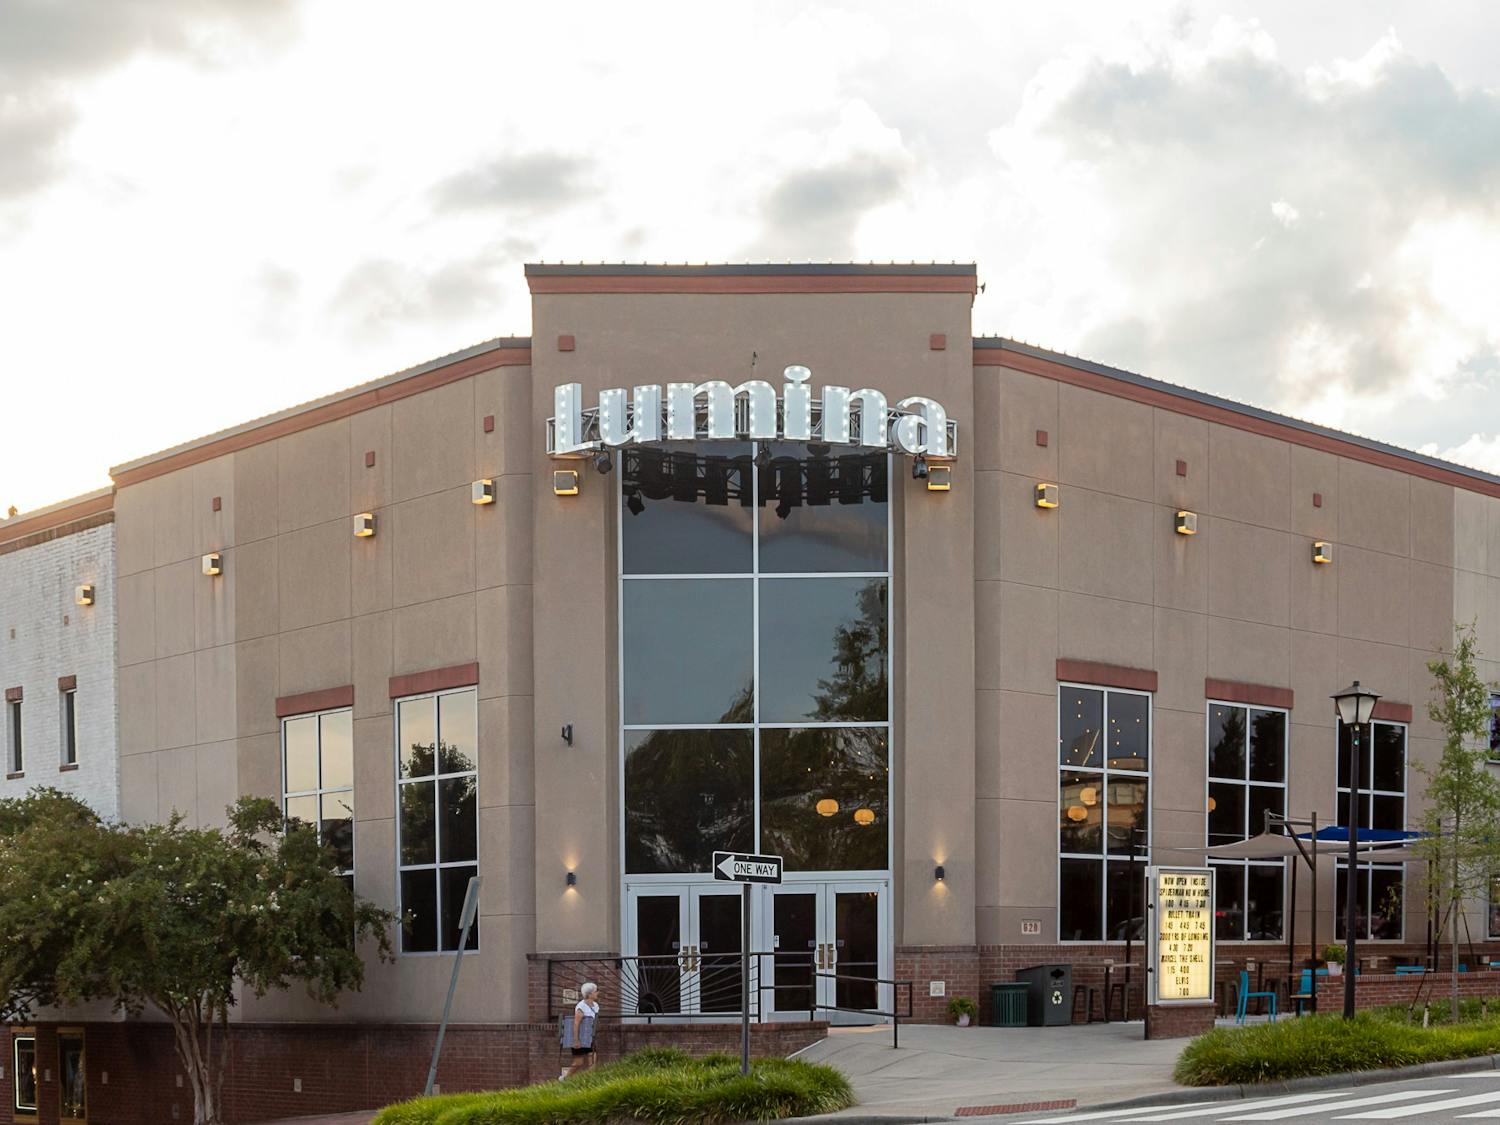 The Lumina Theater, pictured on Sunday, September 4, 2022, is one of the local movie theaters participating in National Cinema Day.